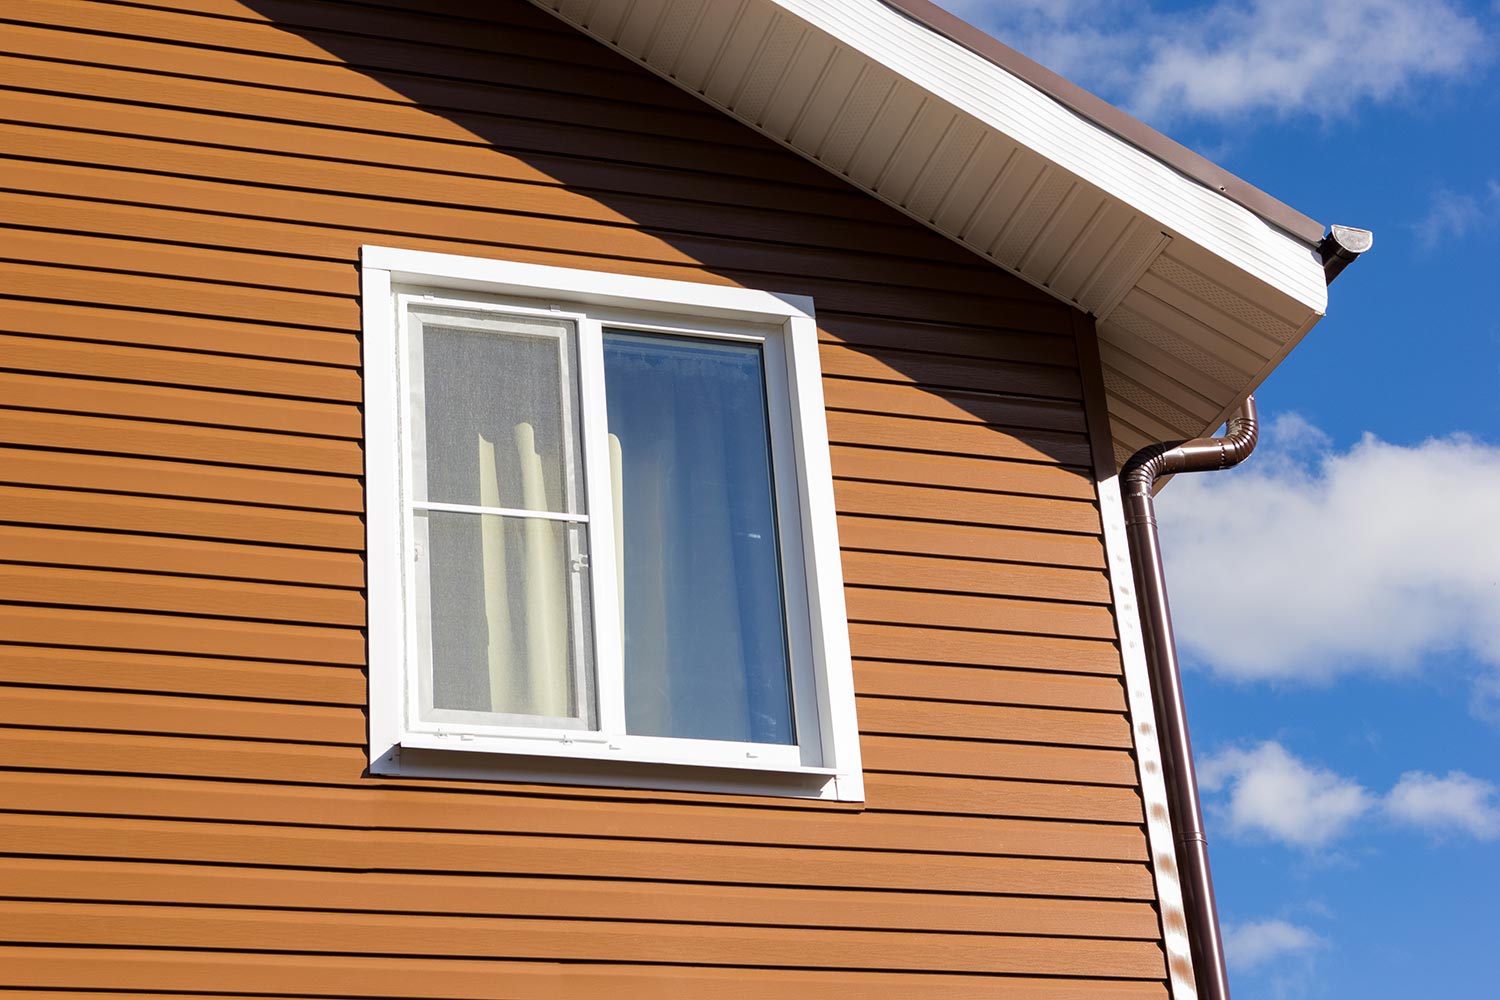 Window in the wall of brown vinyl siding